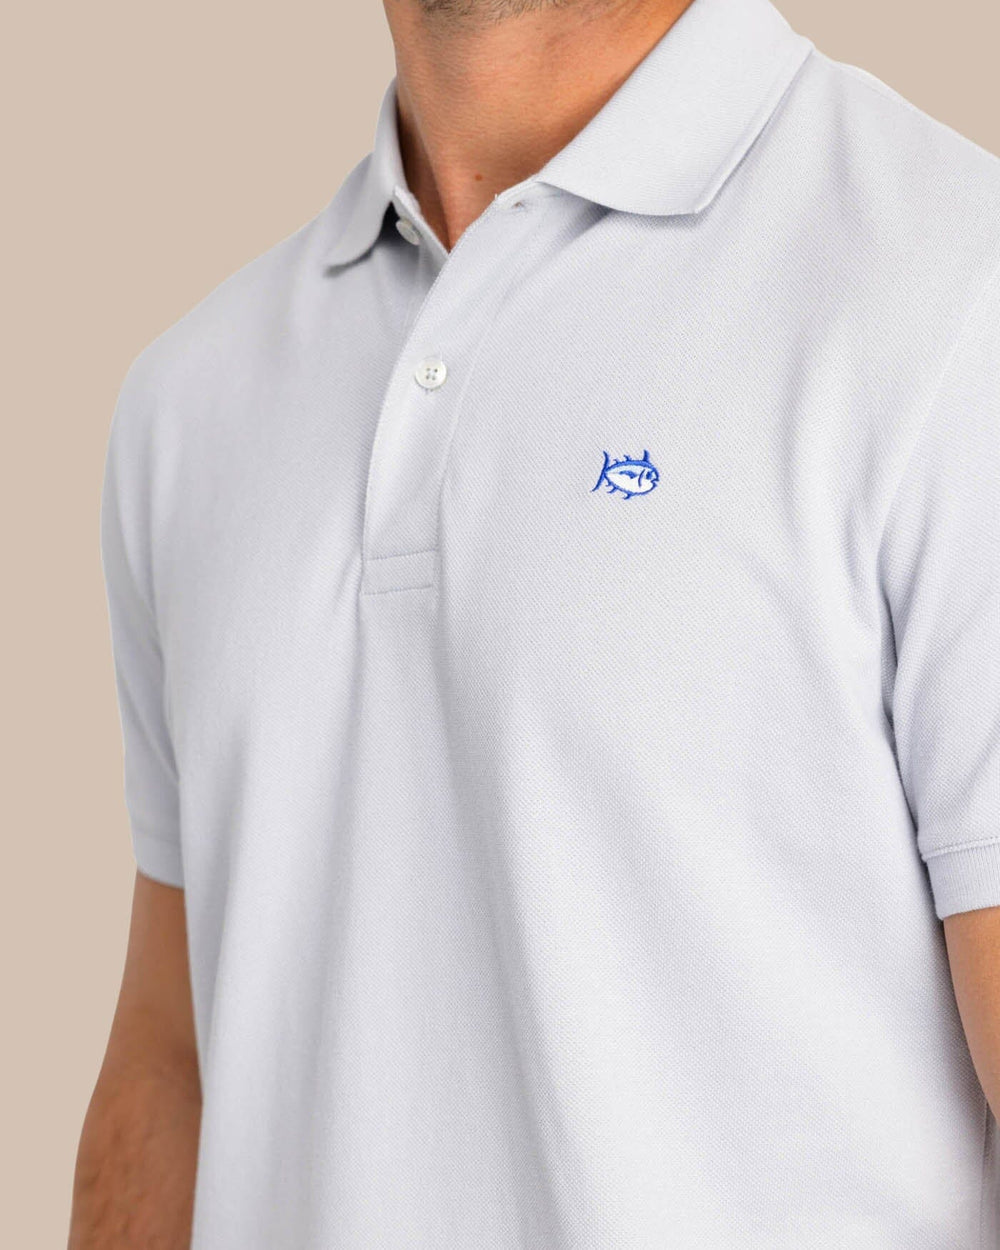 The model detail view of the Men's New Skipjack Polo Shirt by Southern Tide - Slate Grey